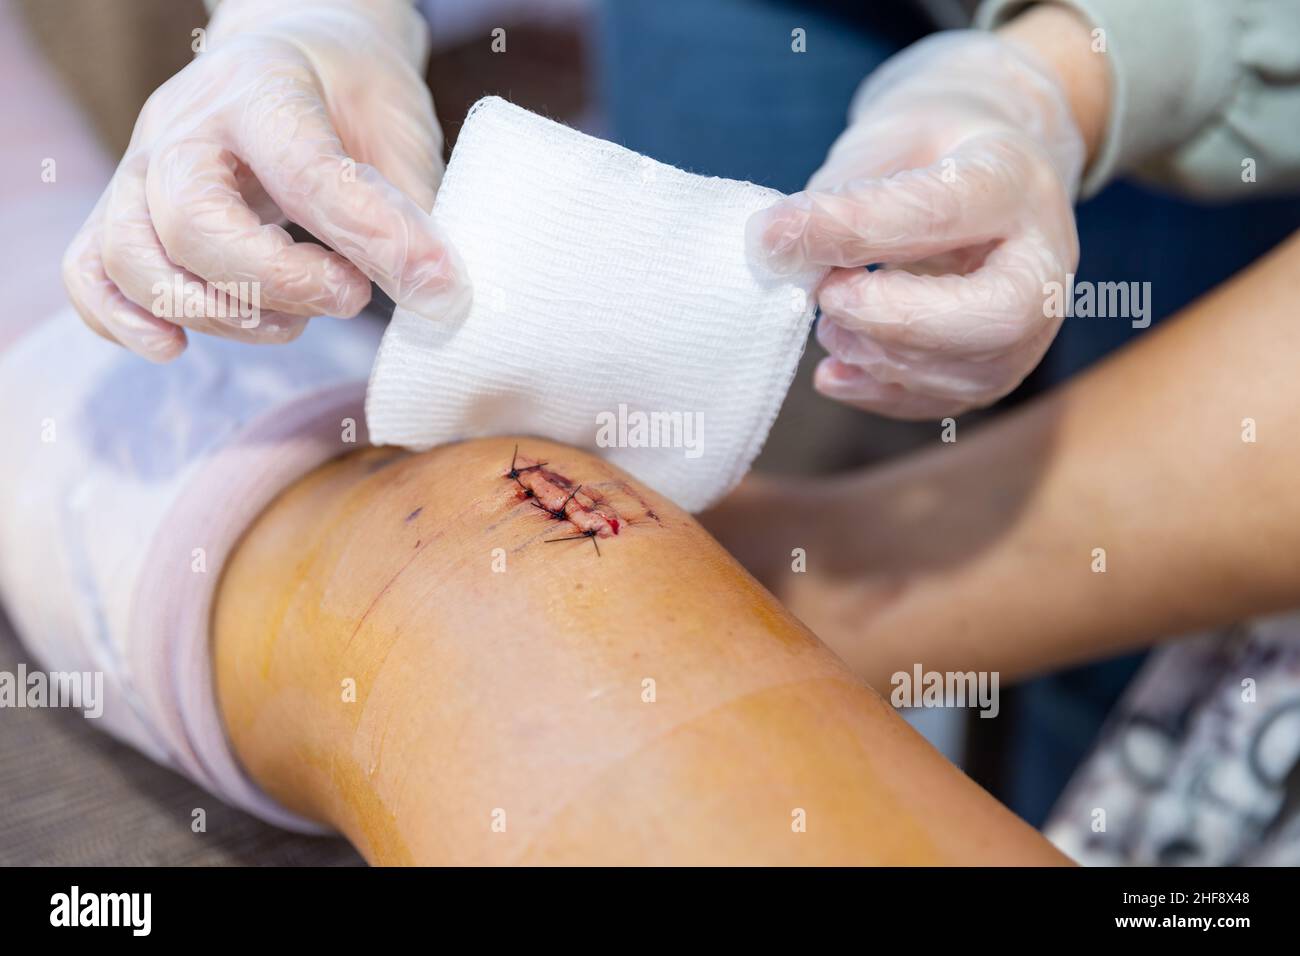 Cleaning and dressing incision and stitches after surgery Stock Photo